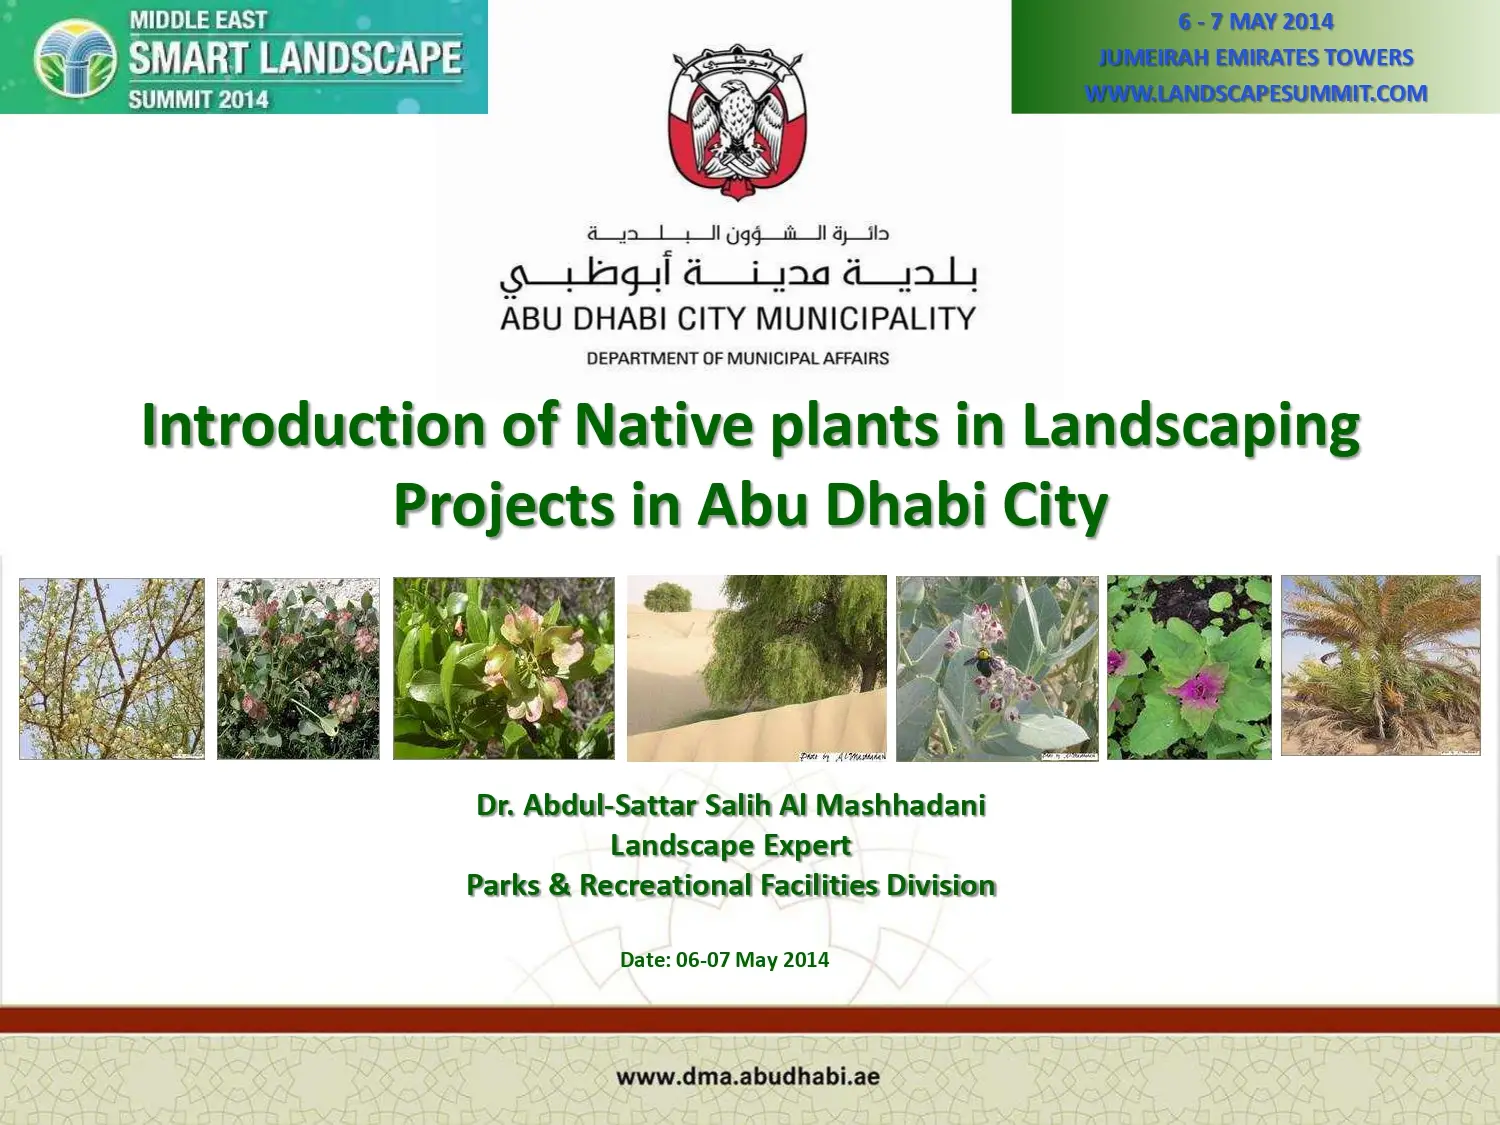 Introduction of Native plants in Landscaping Projects in Abu Dhabi City